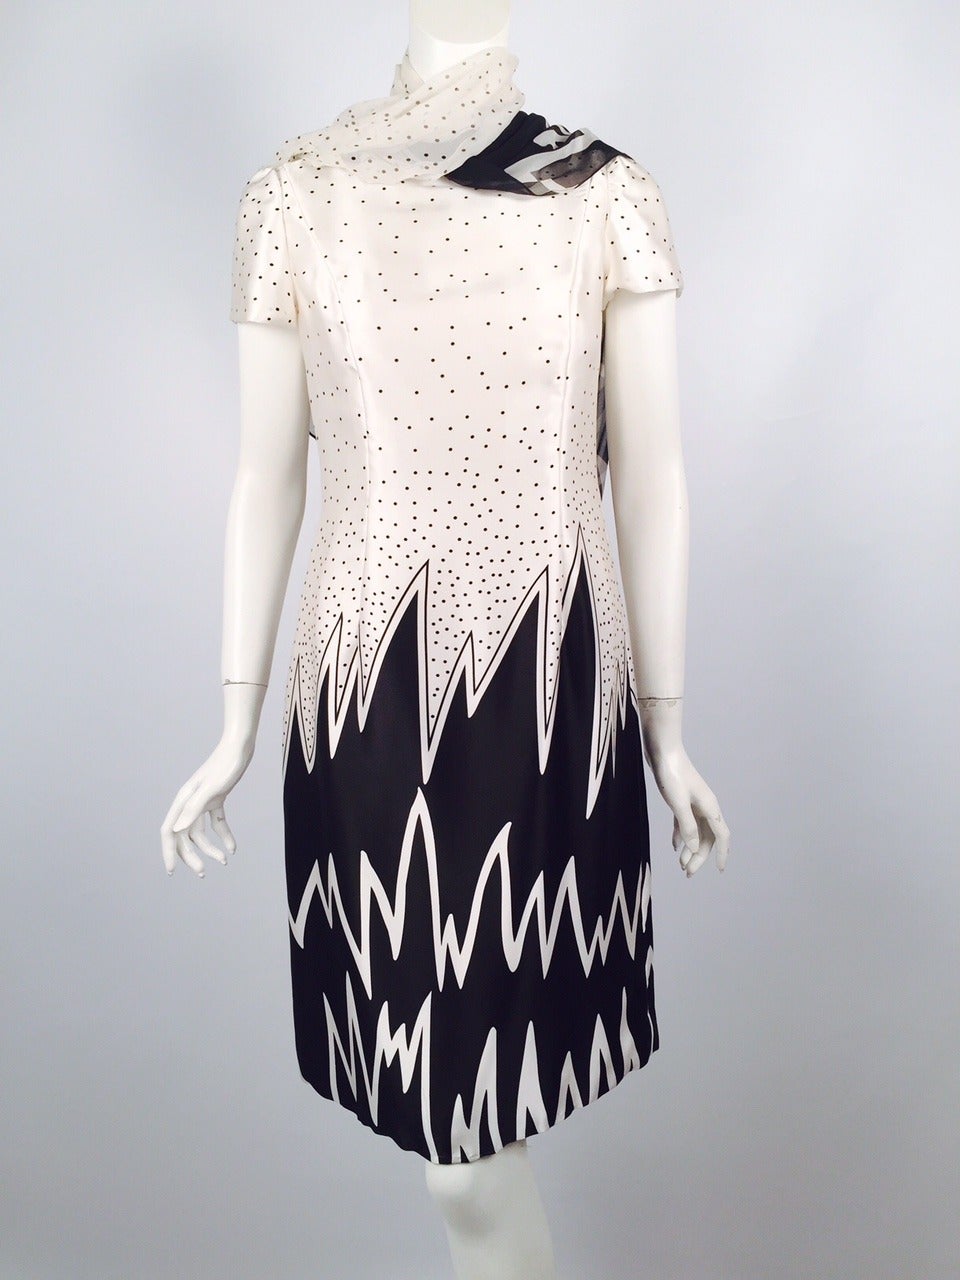 100% Silk Fiandaca Black and White Polka Dots and Flames Dress  is an ode to classic style and 